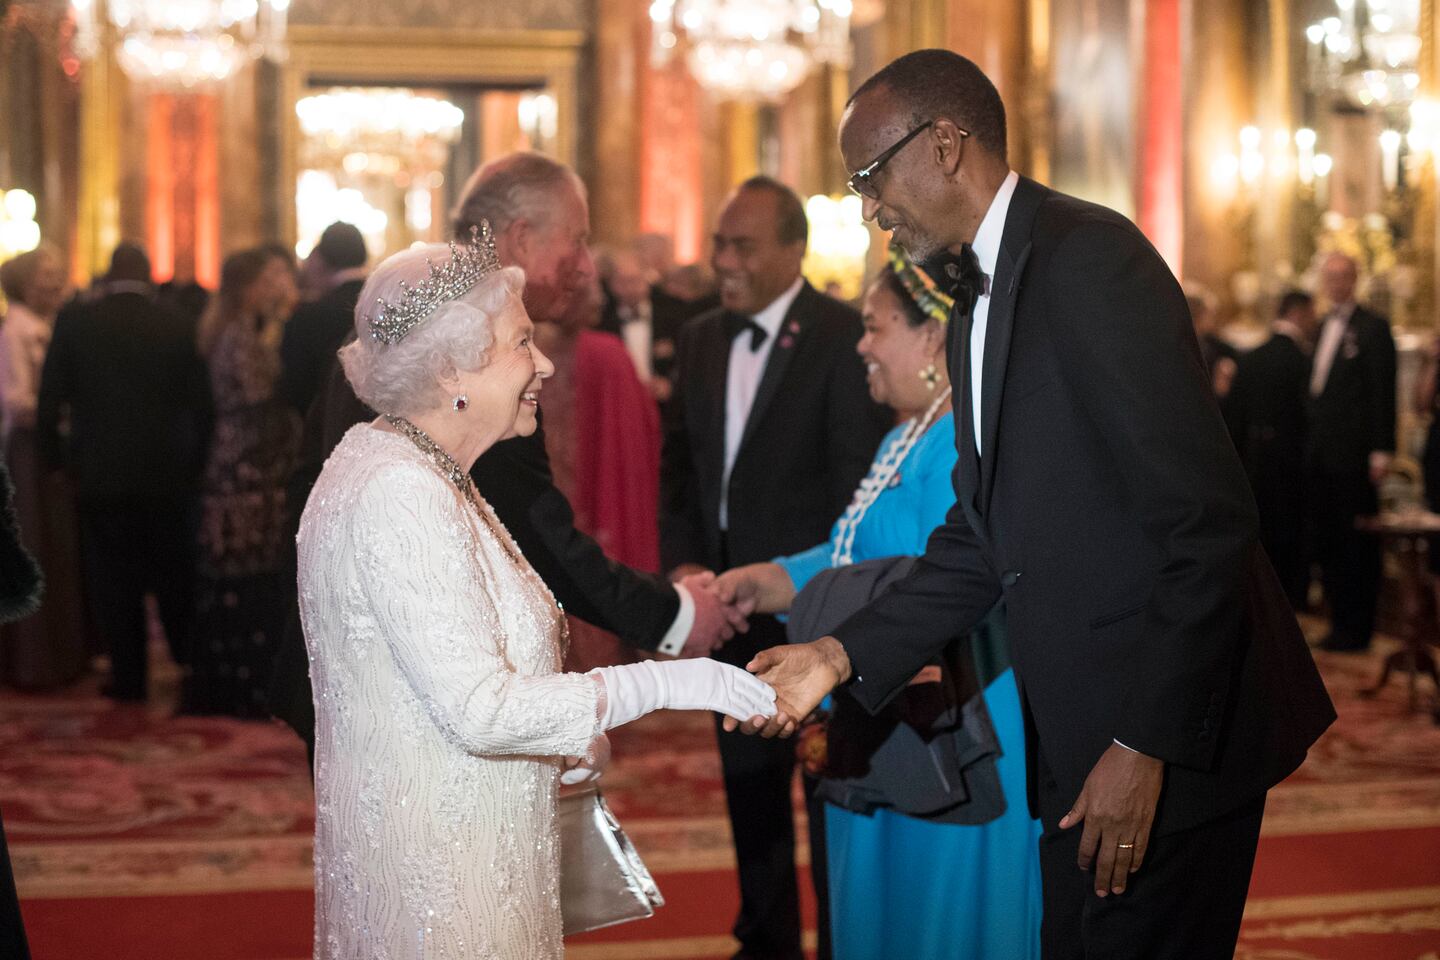 Queen Elizabeth II greets Paul Kagame, President of Rwanda at The Queen's Dinner during the Commonwealth Heads of Government Meeting. Getty Images.